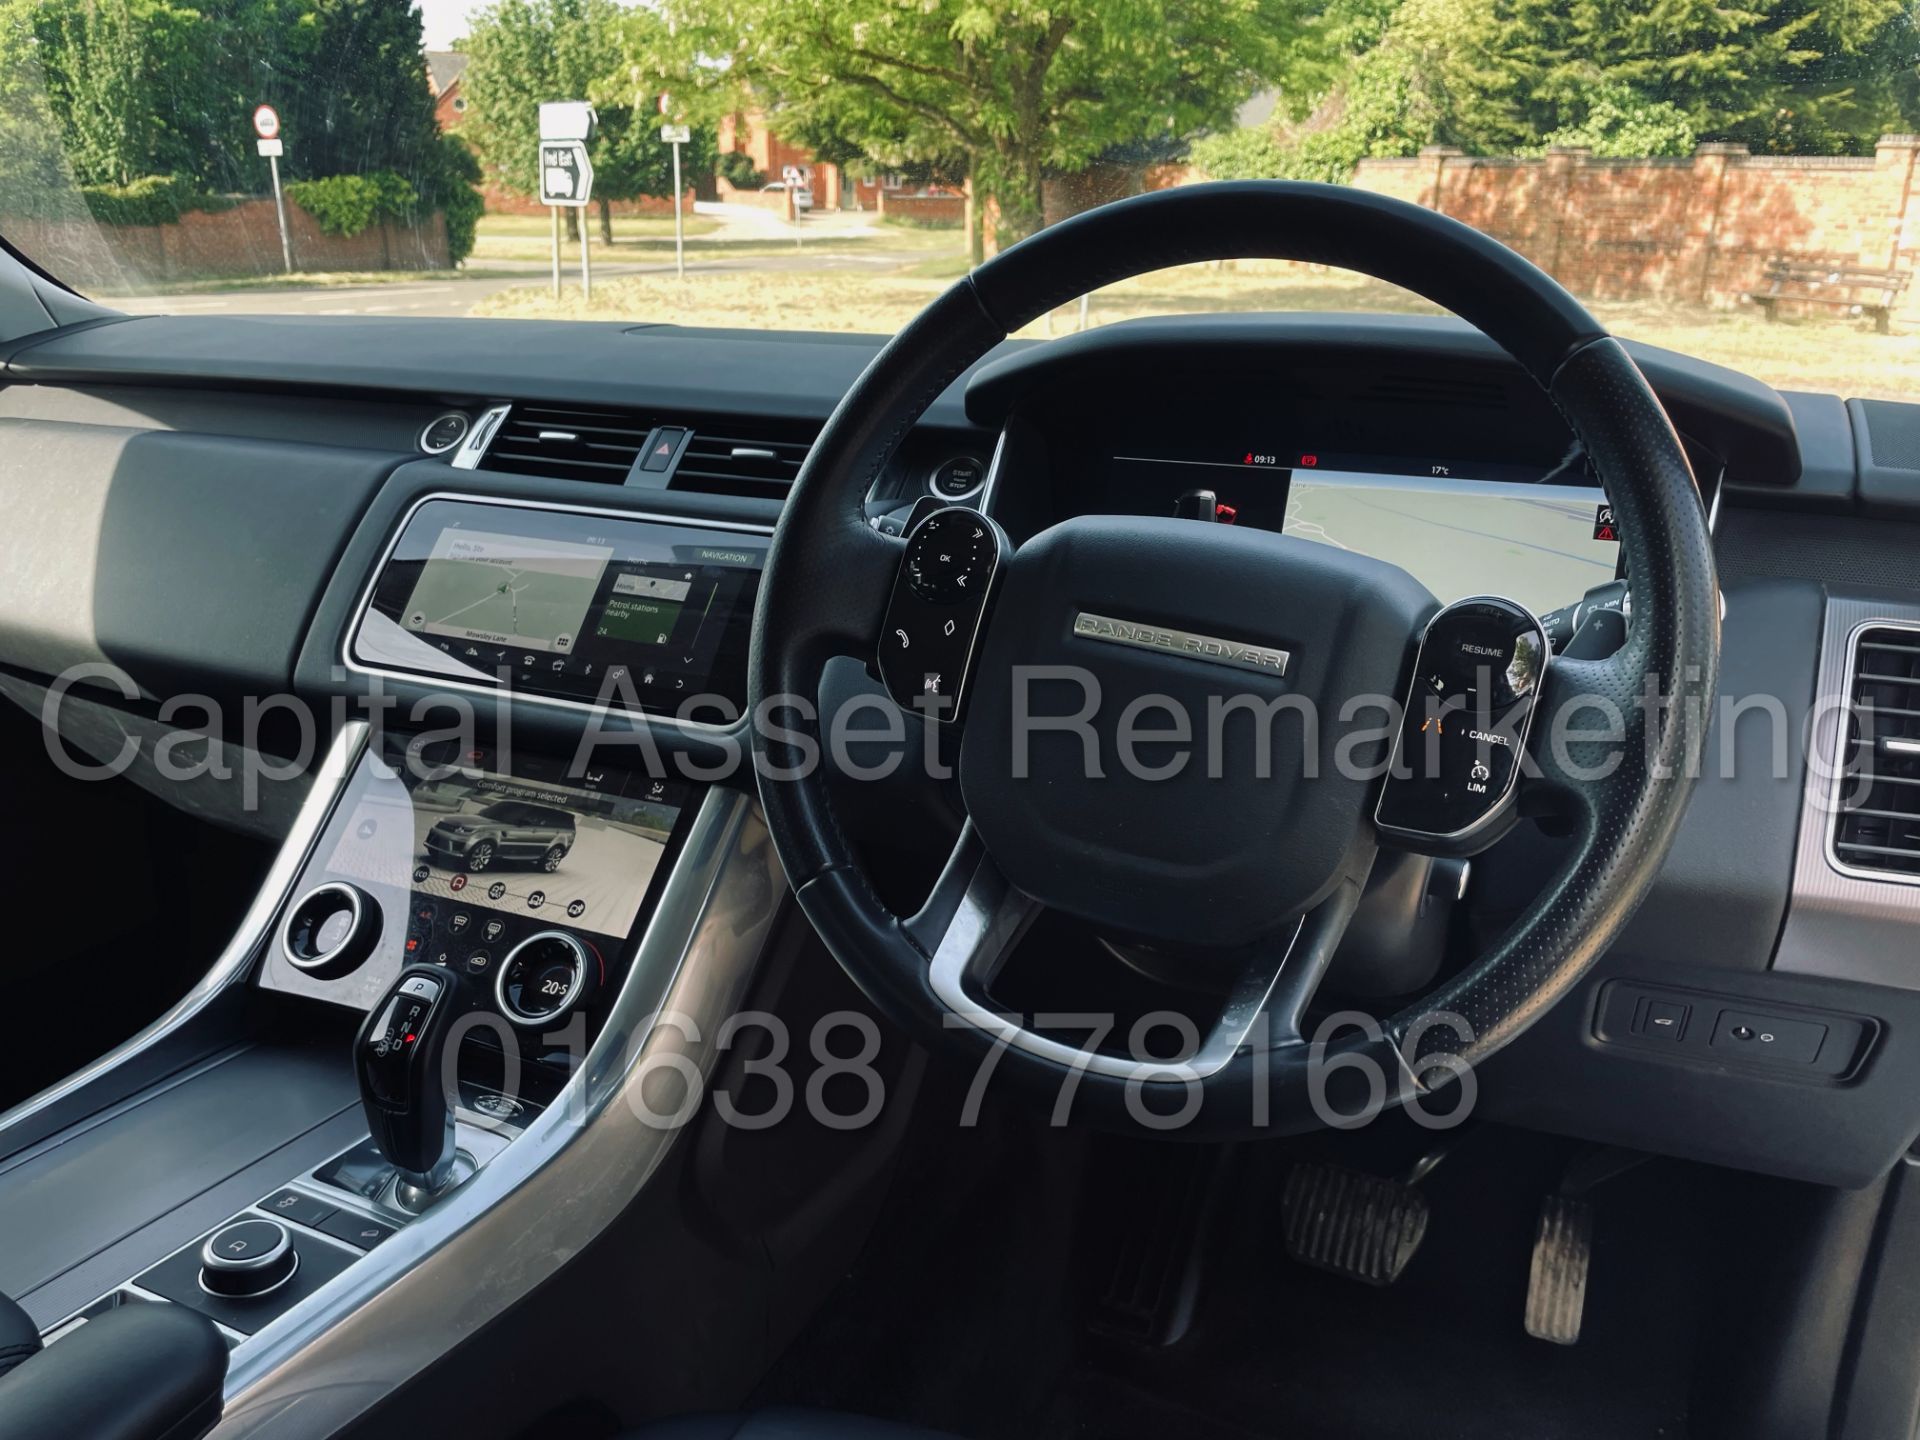 (On Sale) RANGE ROVER SPORT *HSE EDITION* SUV (2018 - NEW MODEL) '8 SPEED AUTO - LEATHER - NAV' - Image 44 of 58